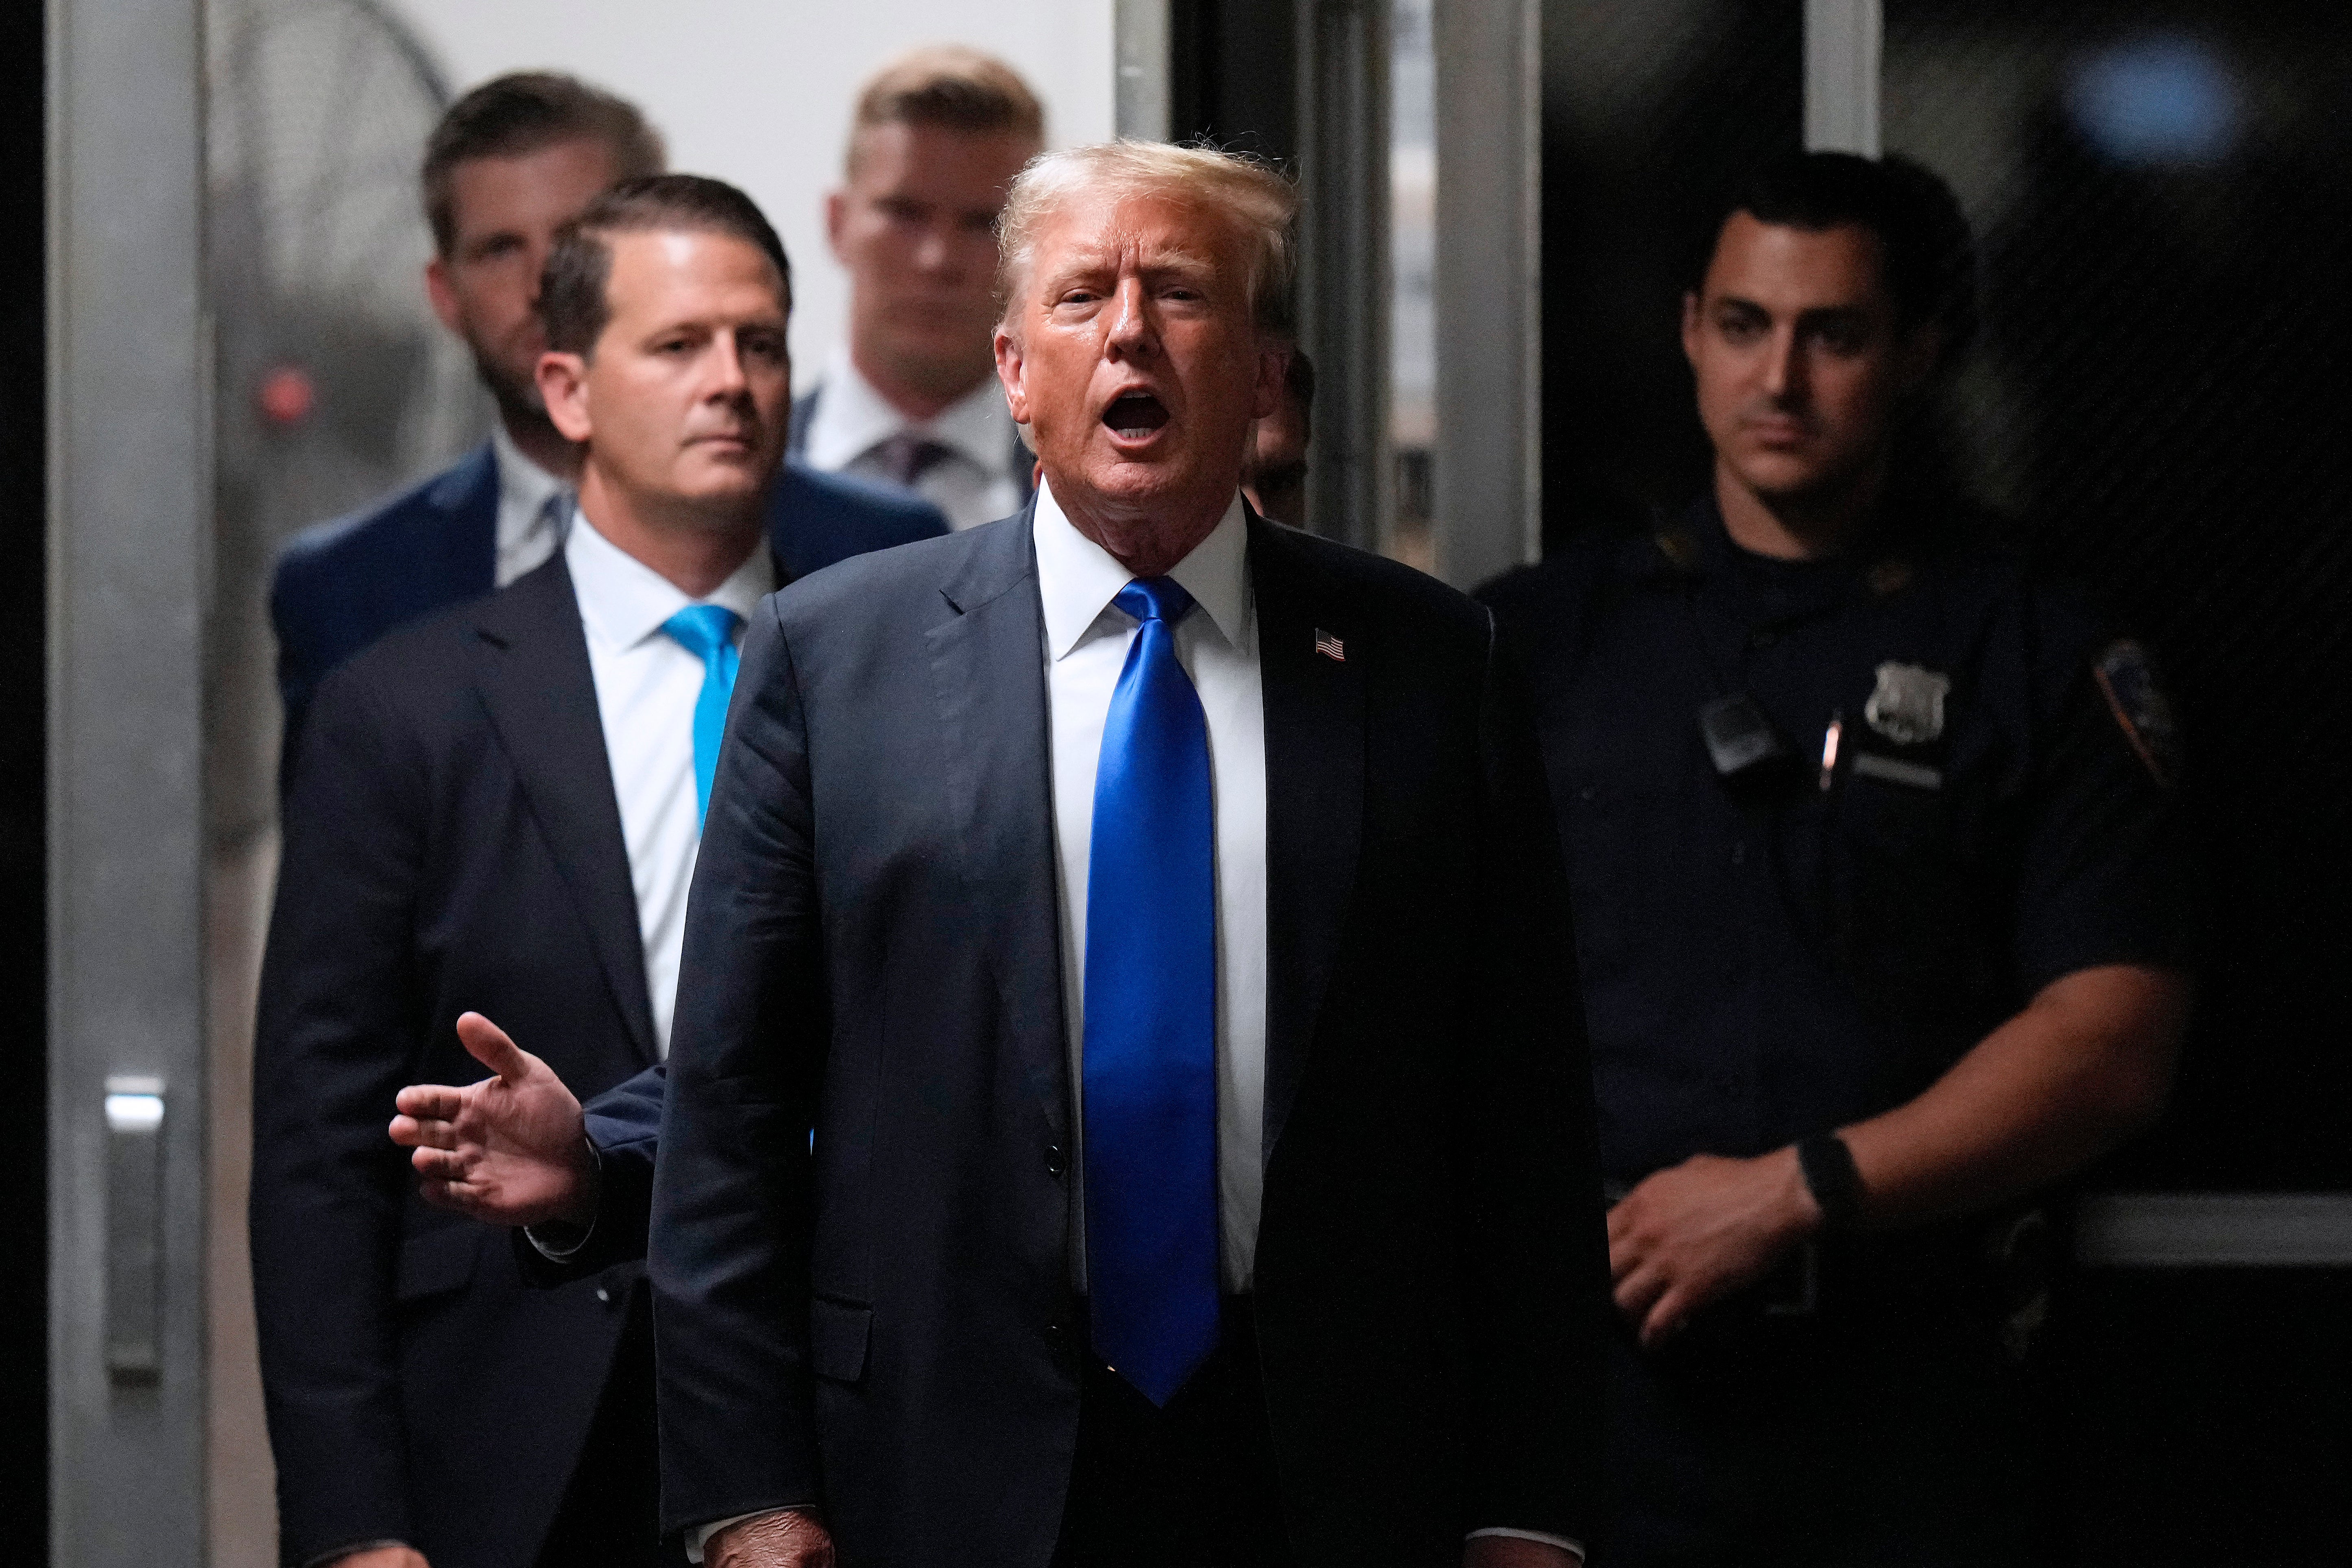 Former US president and Republican presidential candidate Donald Trump speaks to the media on the day a New York jury found him guilty of 34 counts.